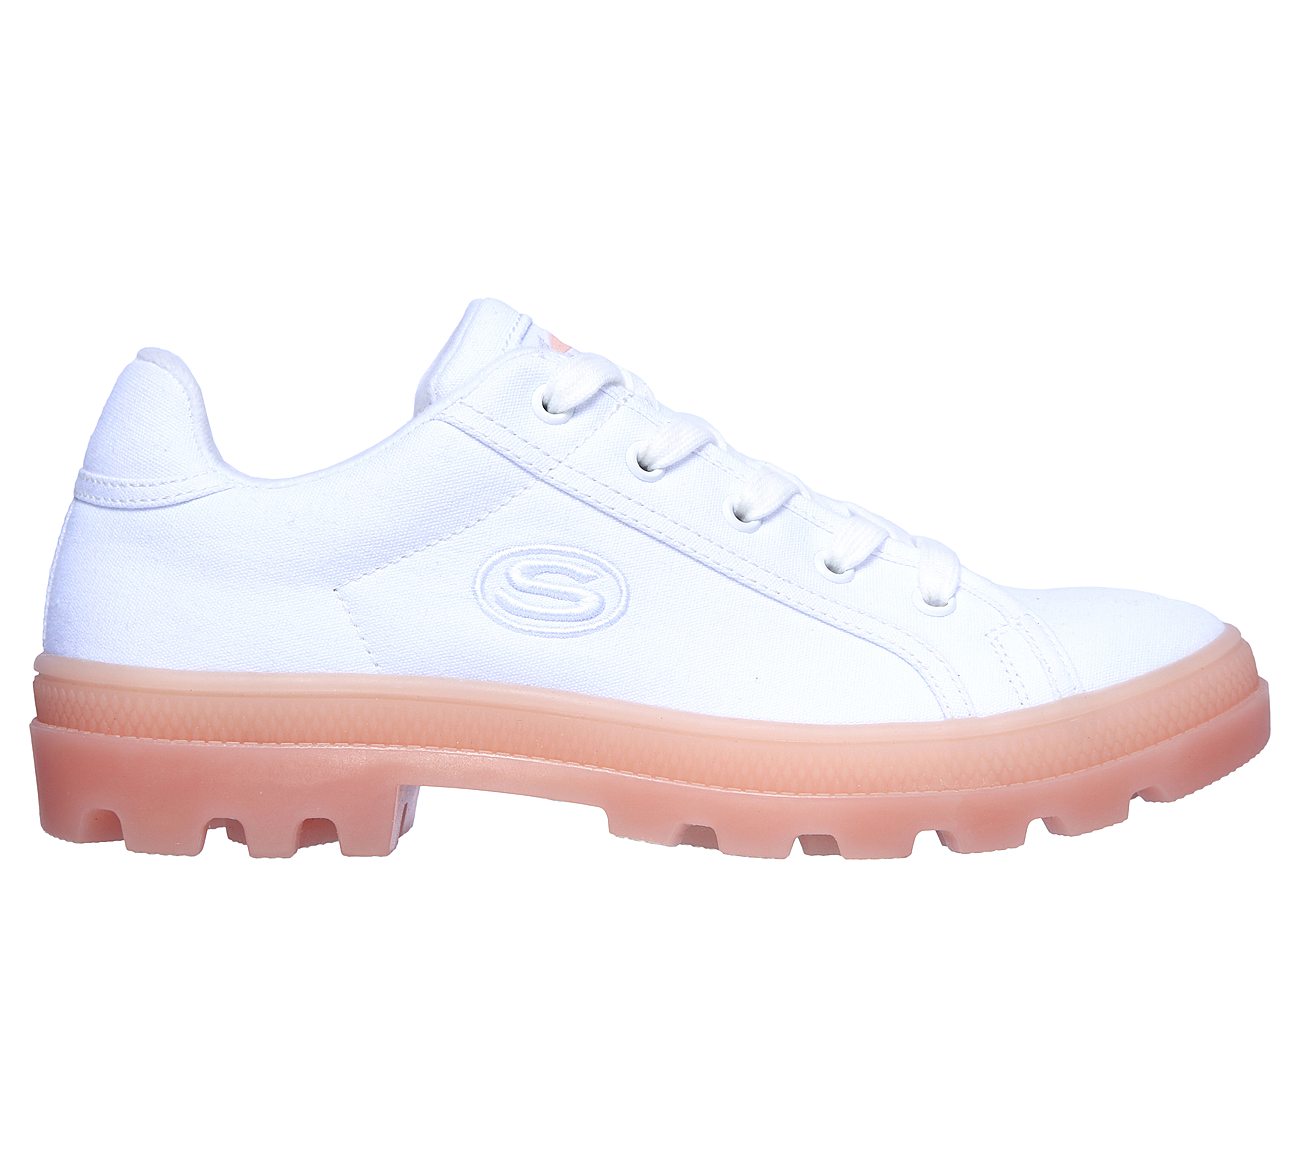 skechers jelly shoes